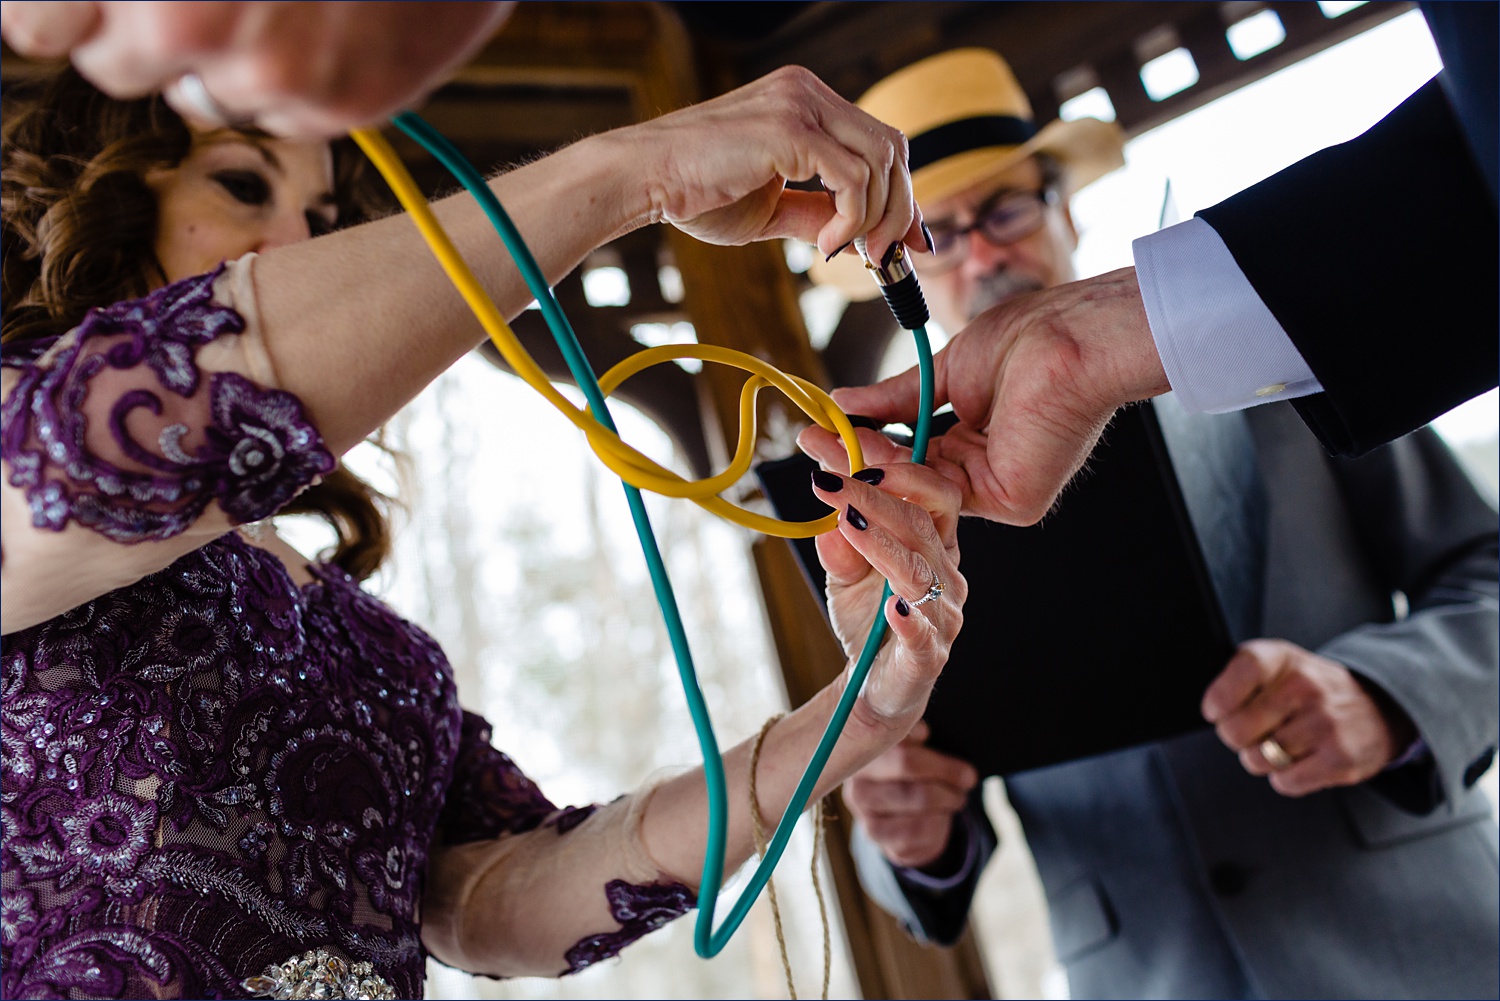 The bride and groom tie mic cables together for their ceremony outdoors in New Hampshire White Mountains